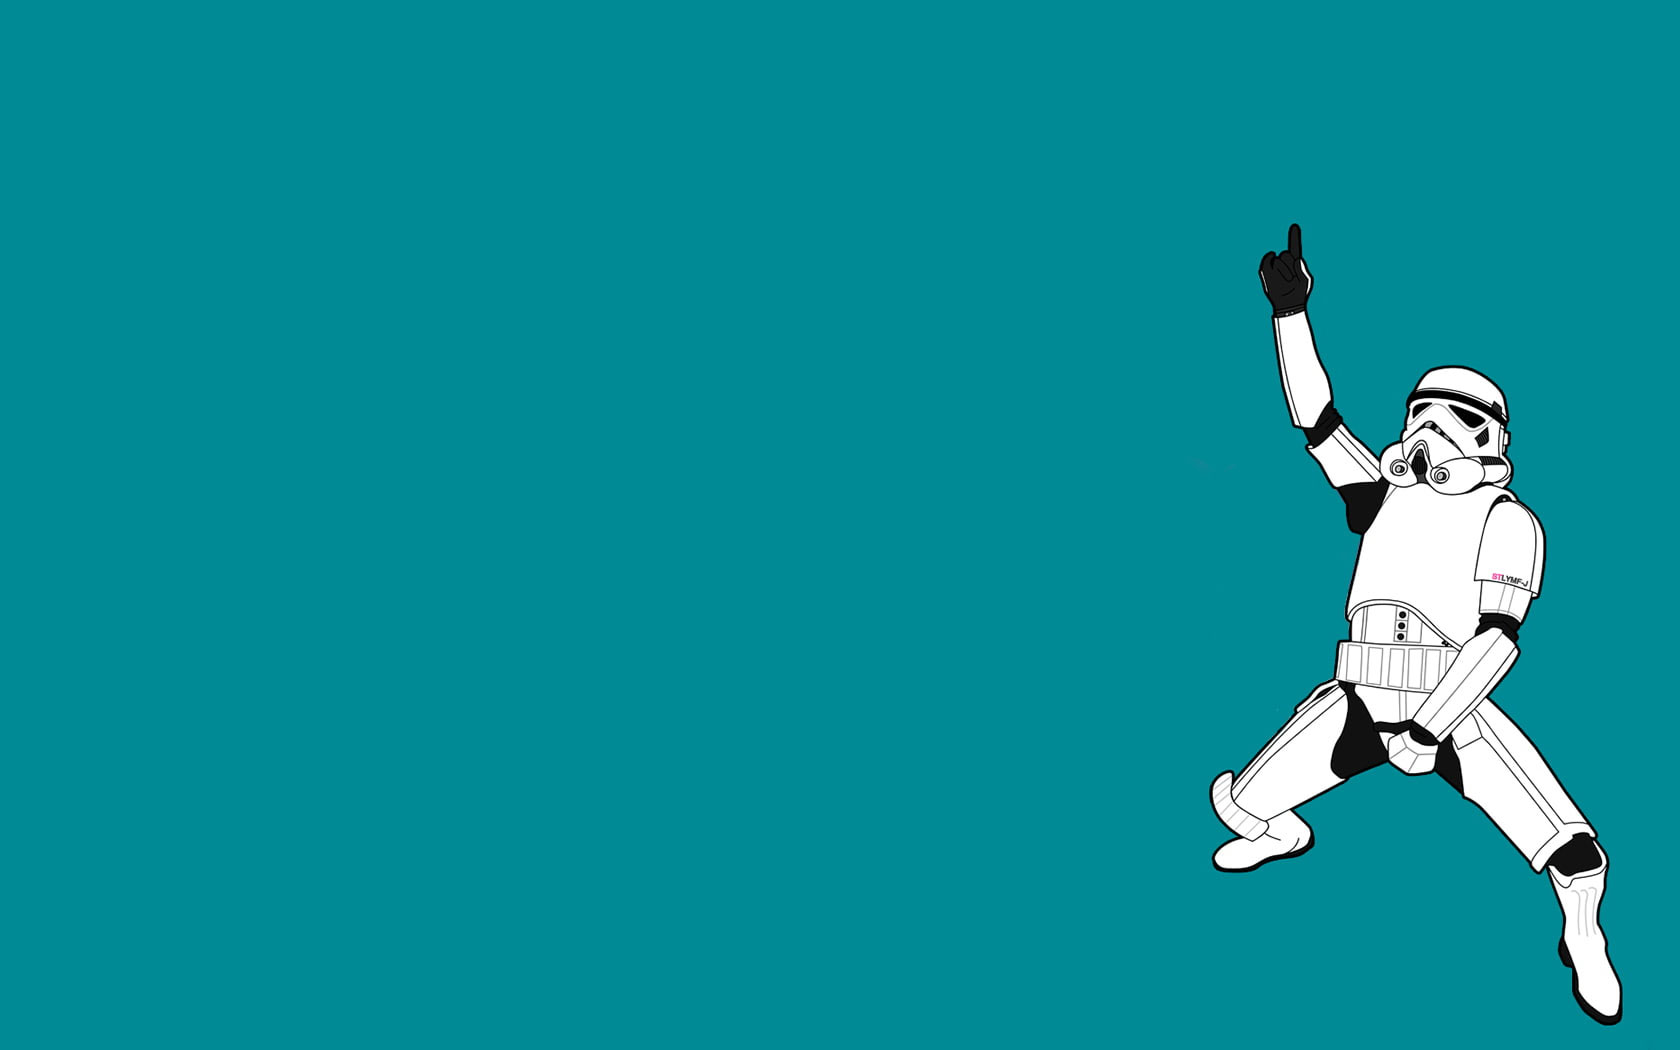 Wallpaper Background, Dance, Funny, Simple, Star Wars